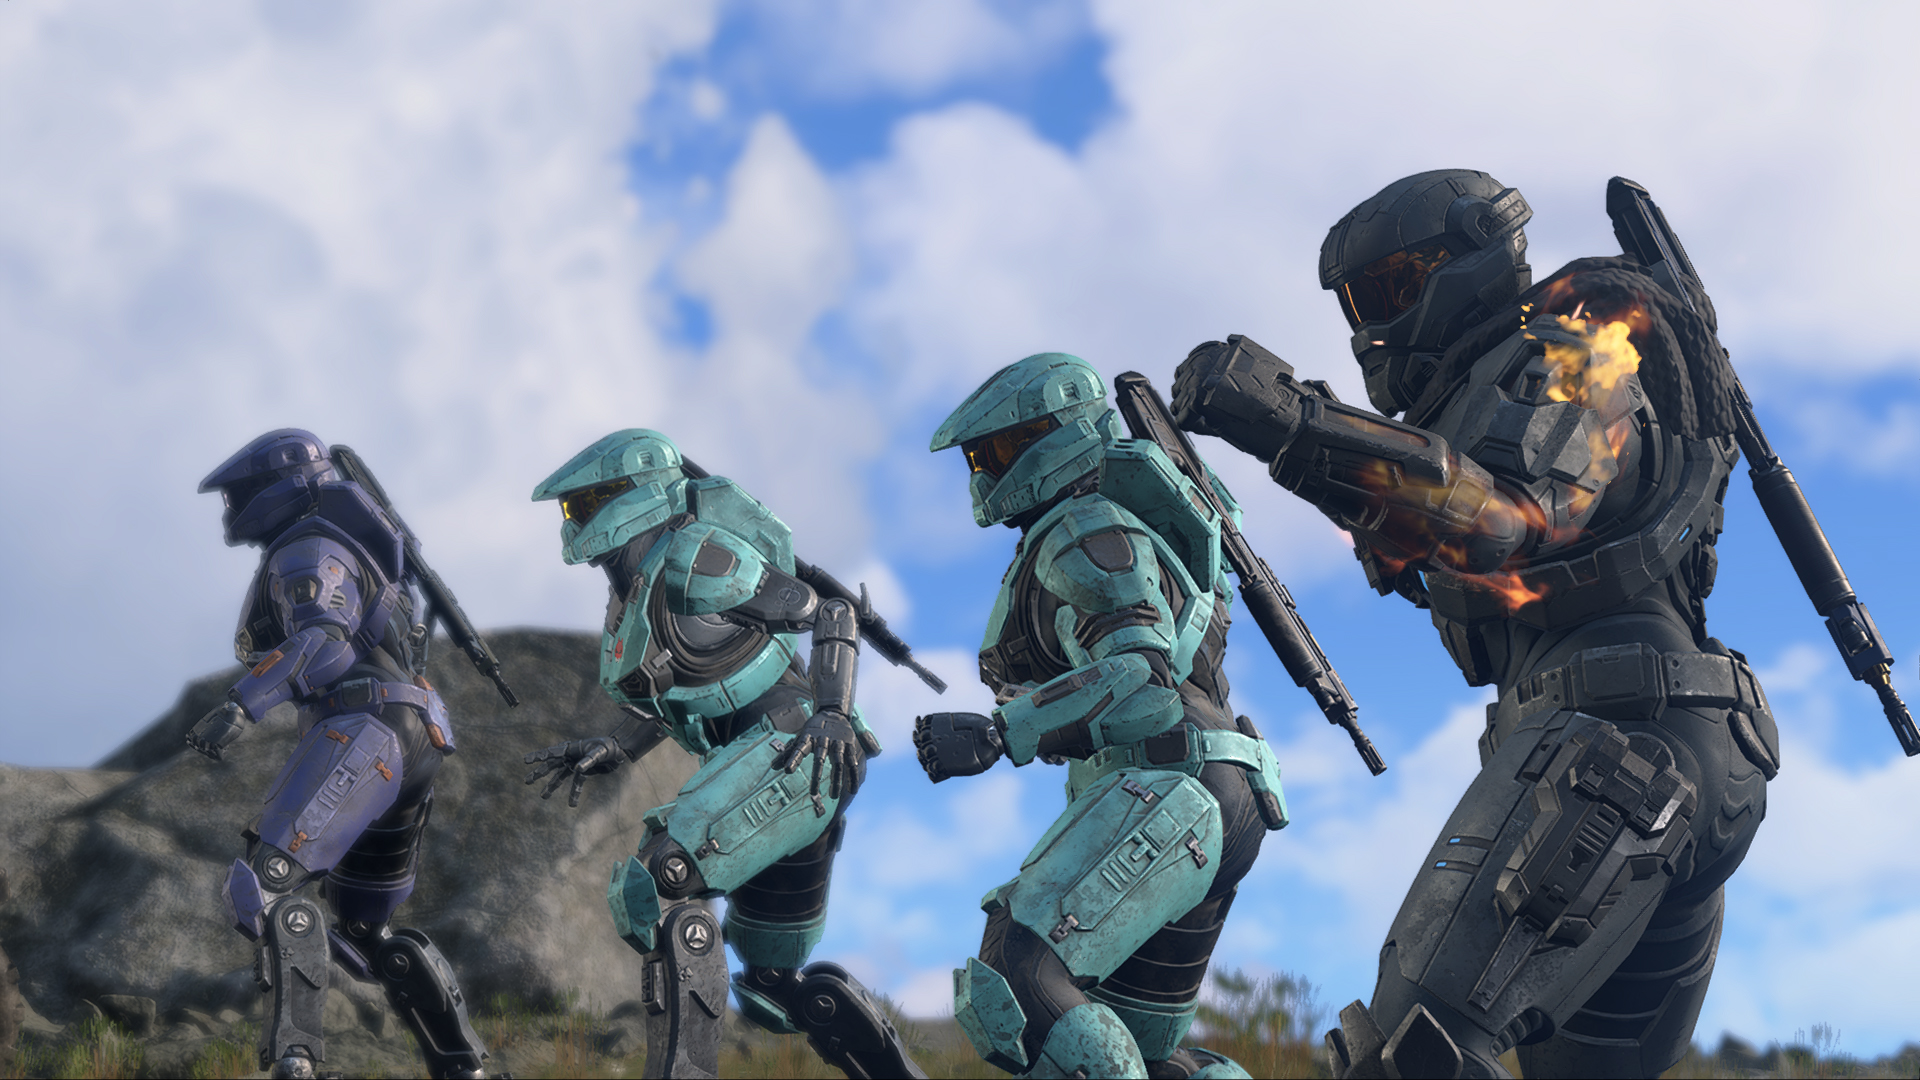 A team of Spartans gear up for battle in Halo Infinite.